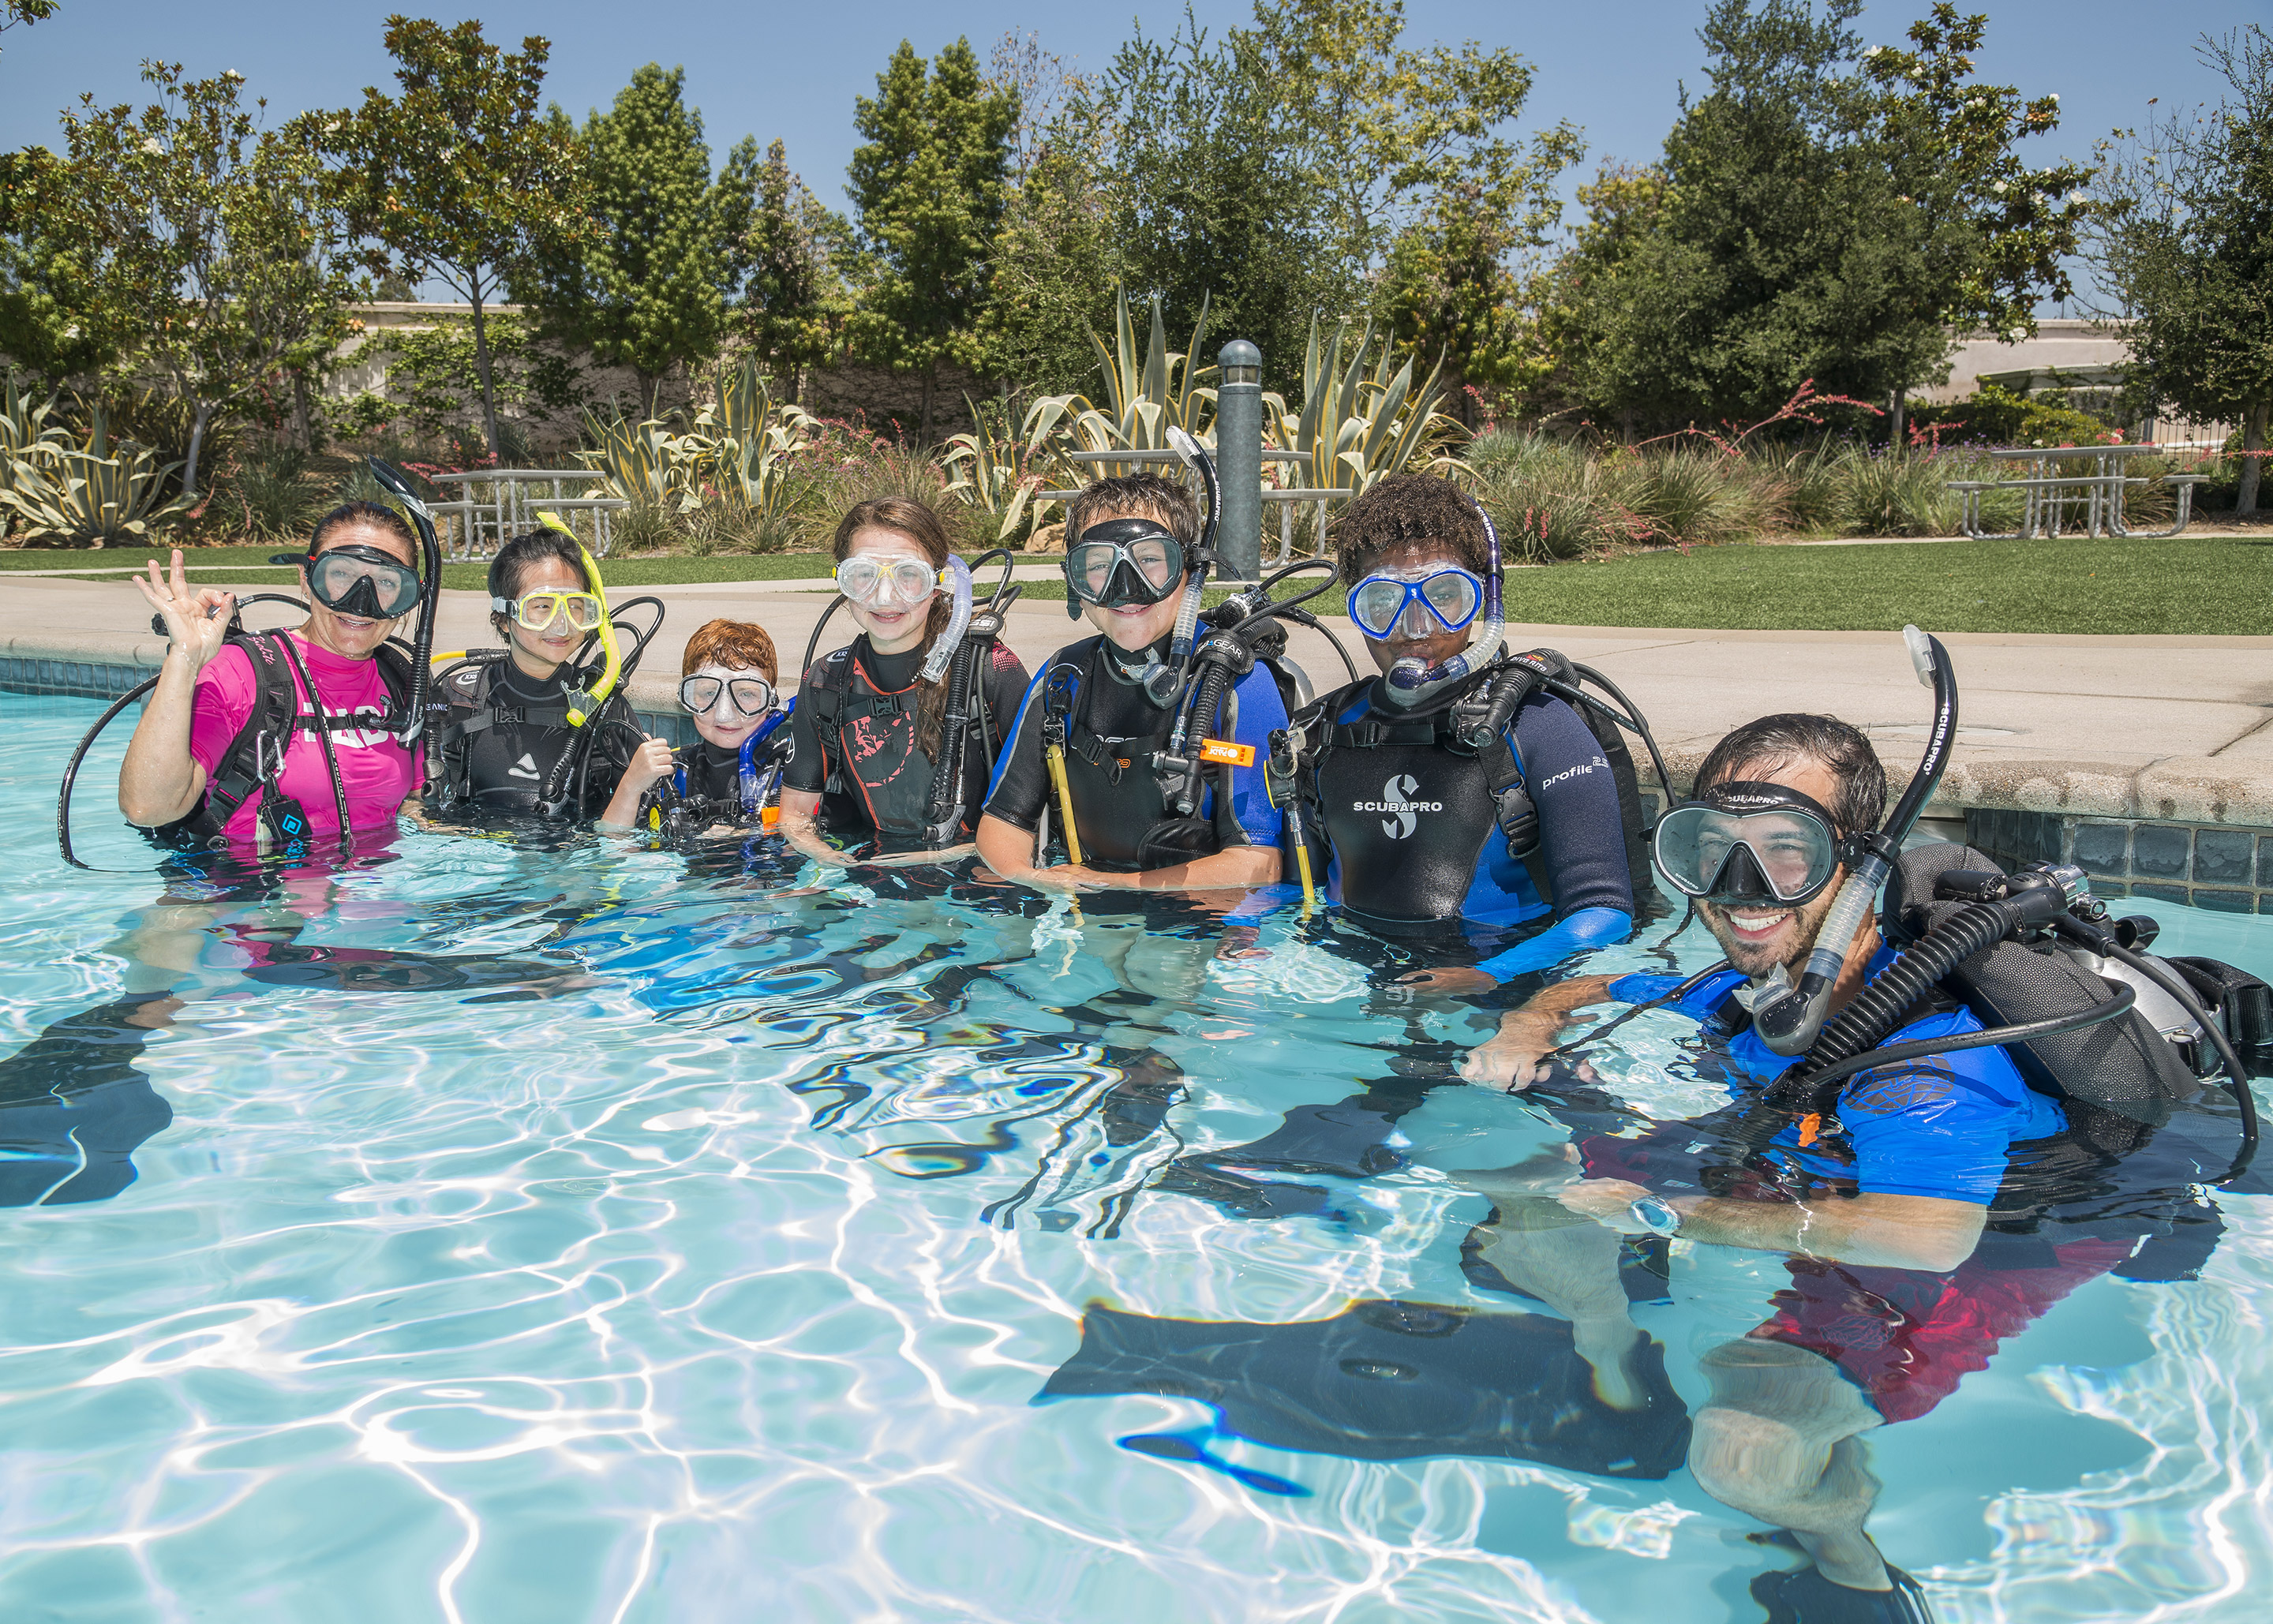 Scuba Diving Classes For Kids And Teens